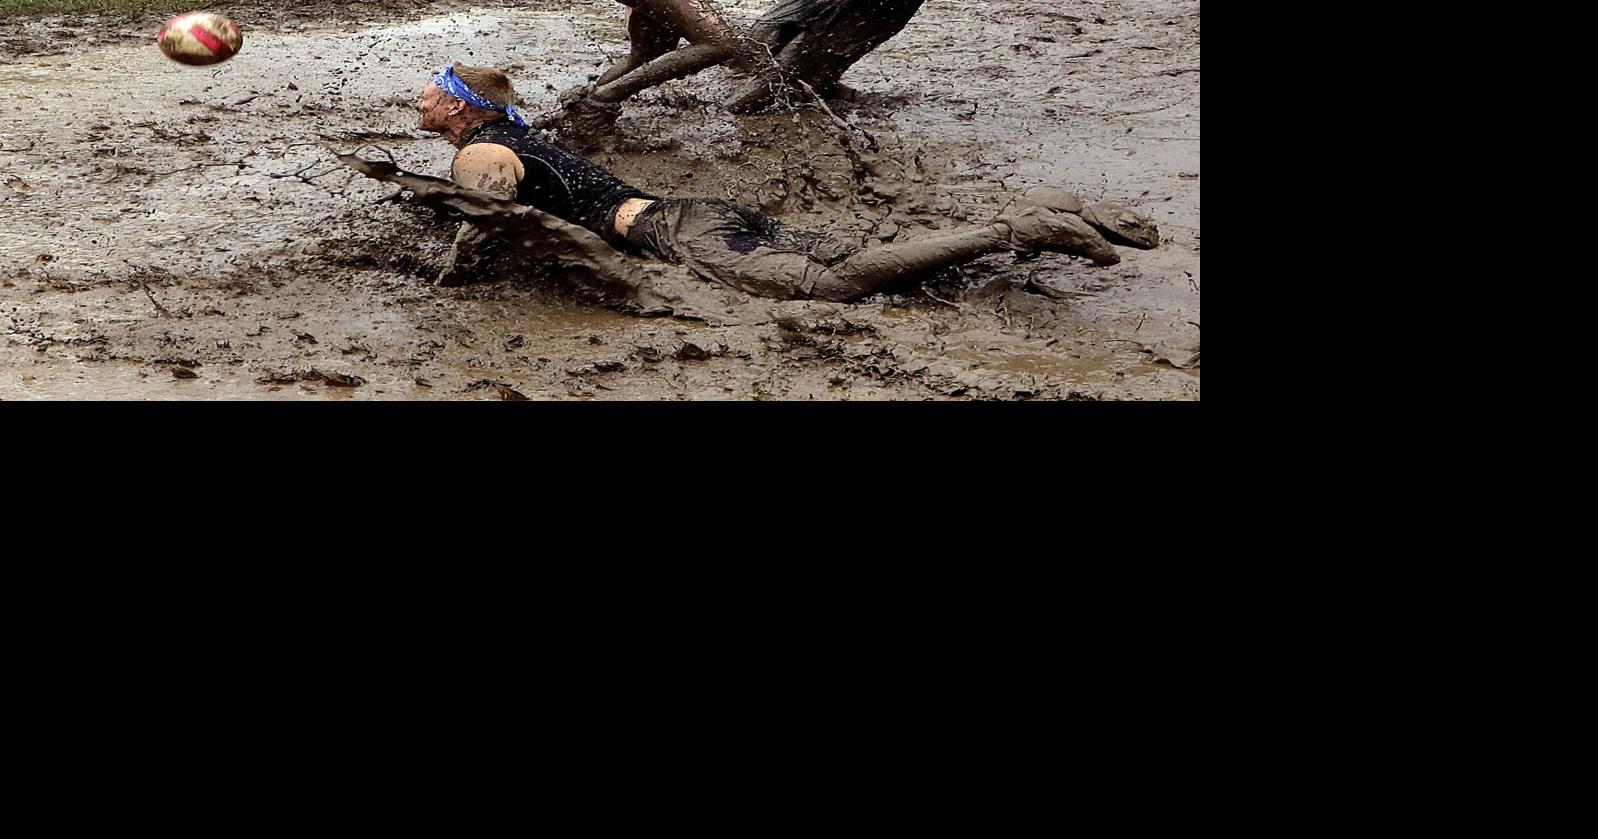 Fall Creek Fun Fest serves up good clean fun with mud volleyball